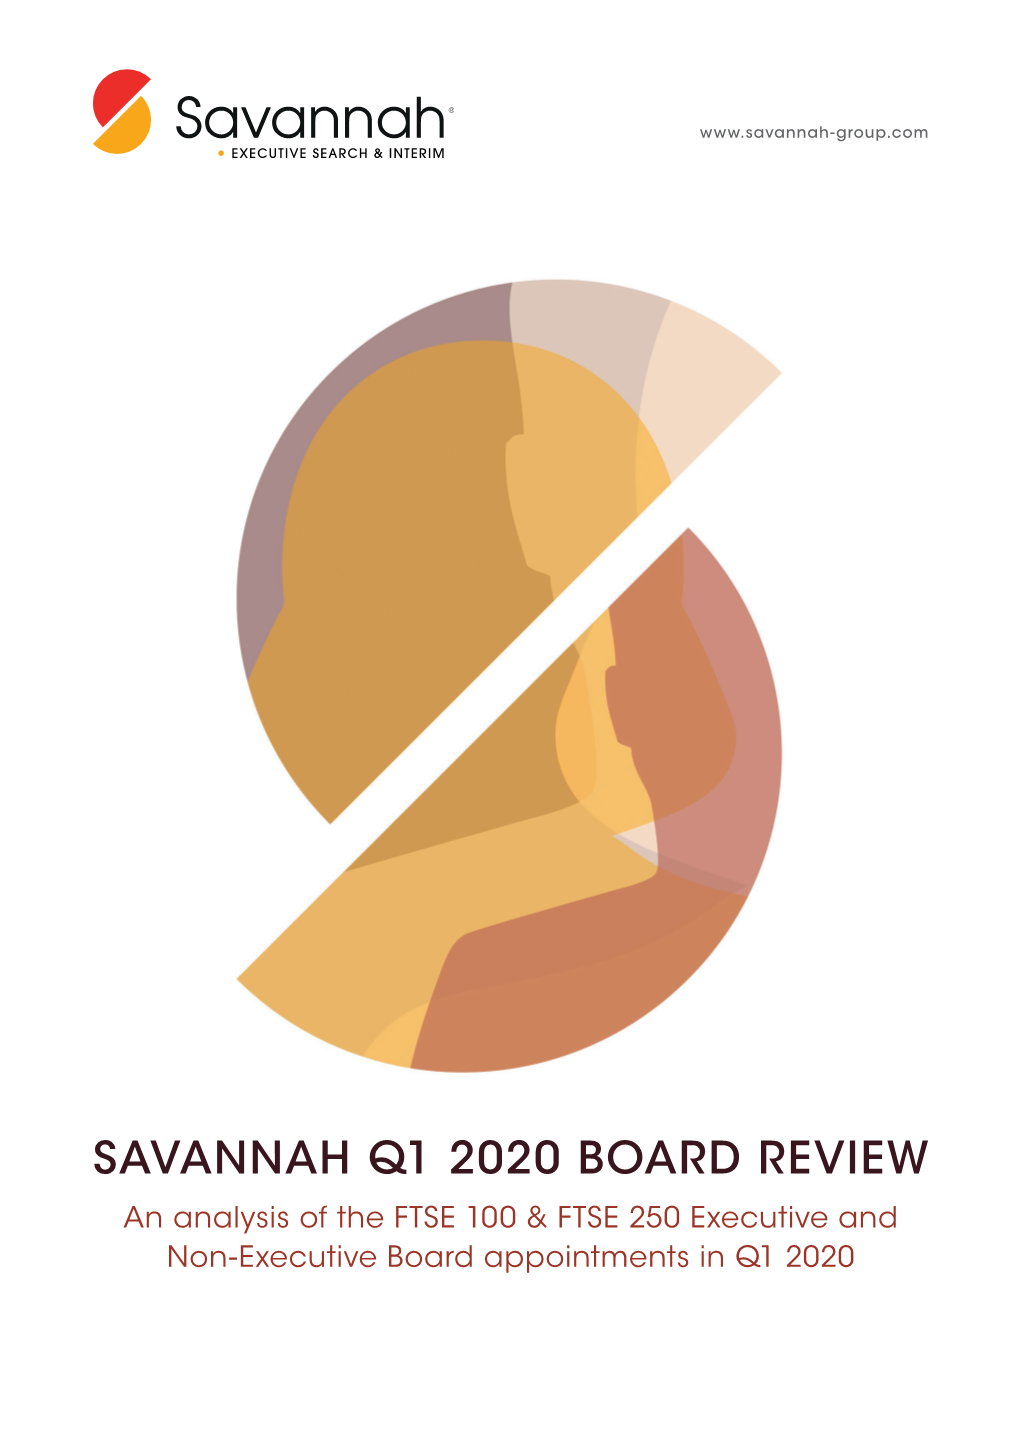 SAVANNAH Q1 2020 BOARD REVIEW an Analysis of the FTSE 100 & FTSE 250 Executive and Non-Executive Board Appointments in Q1 2020 INTRODUCTION